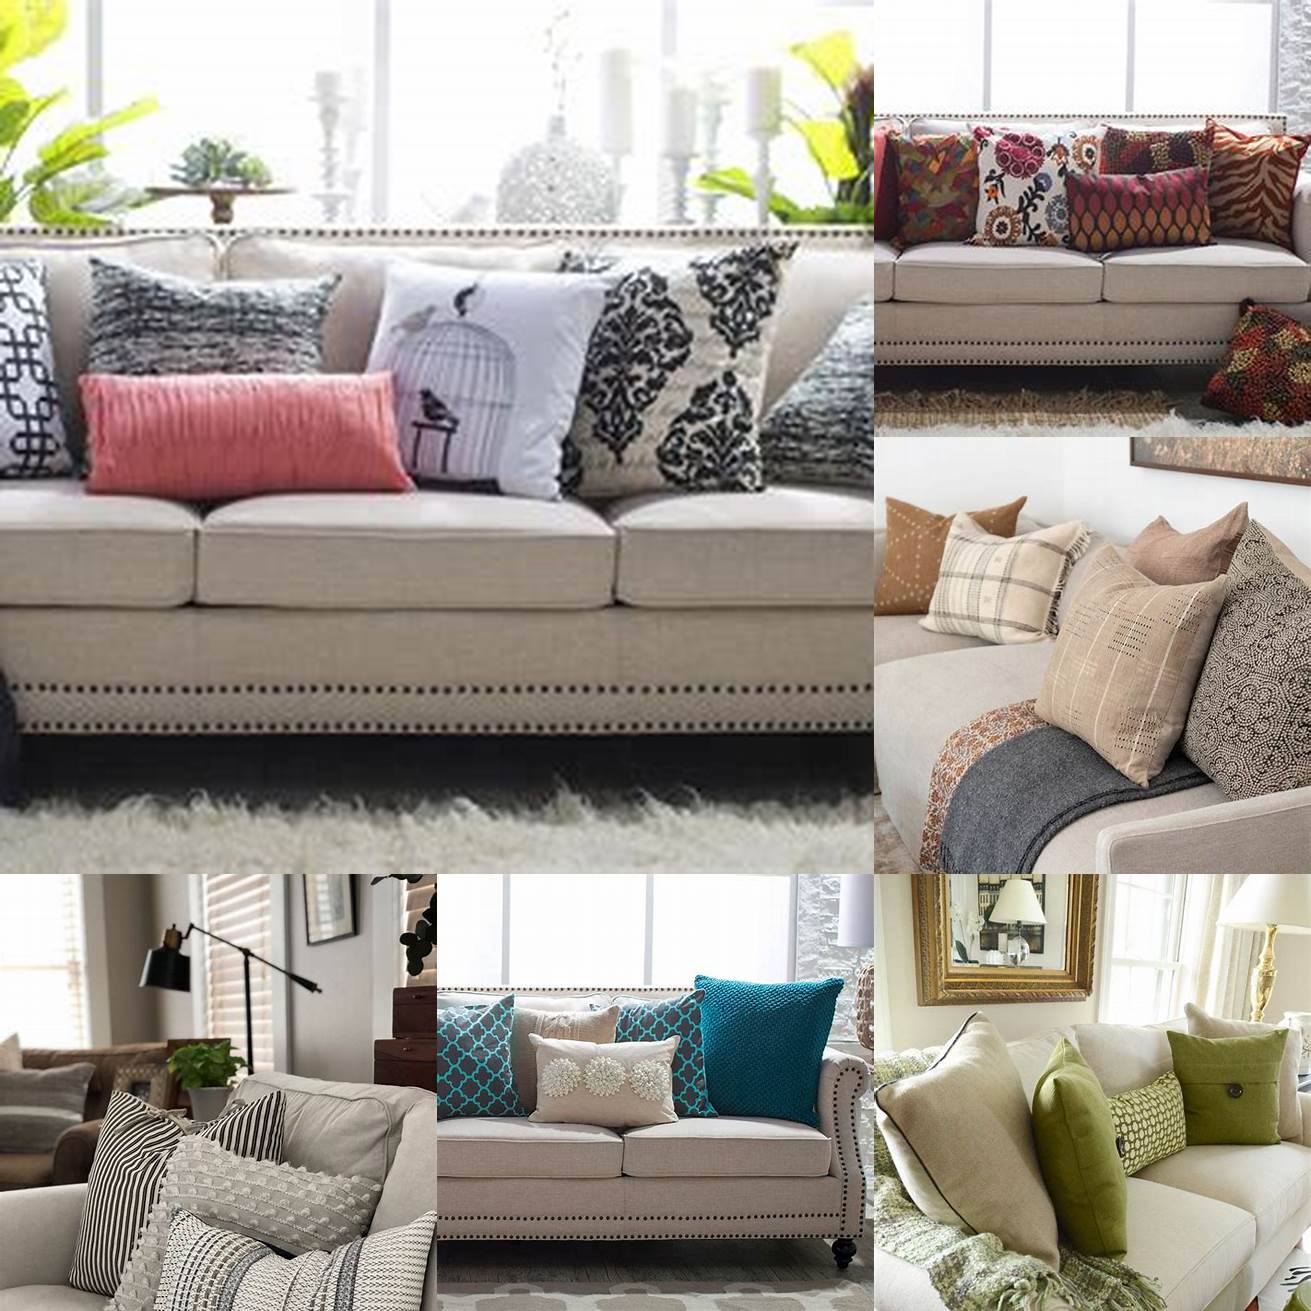 Cozy neutral fabric sofa with throw pillows and blankets